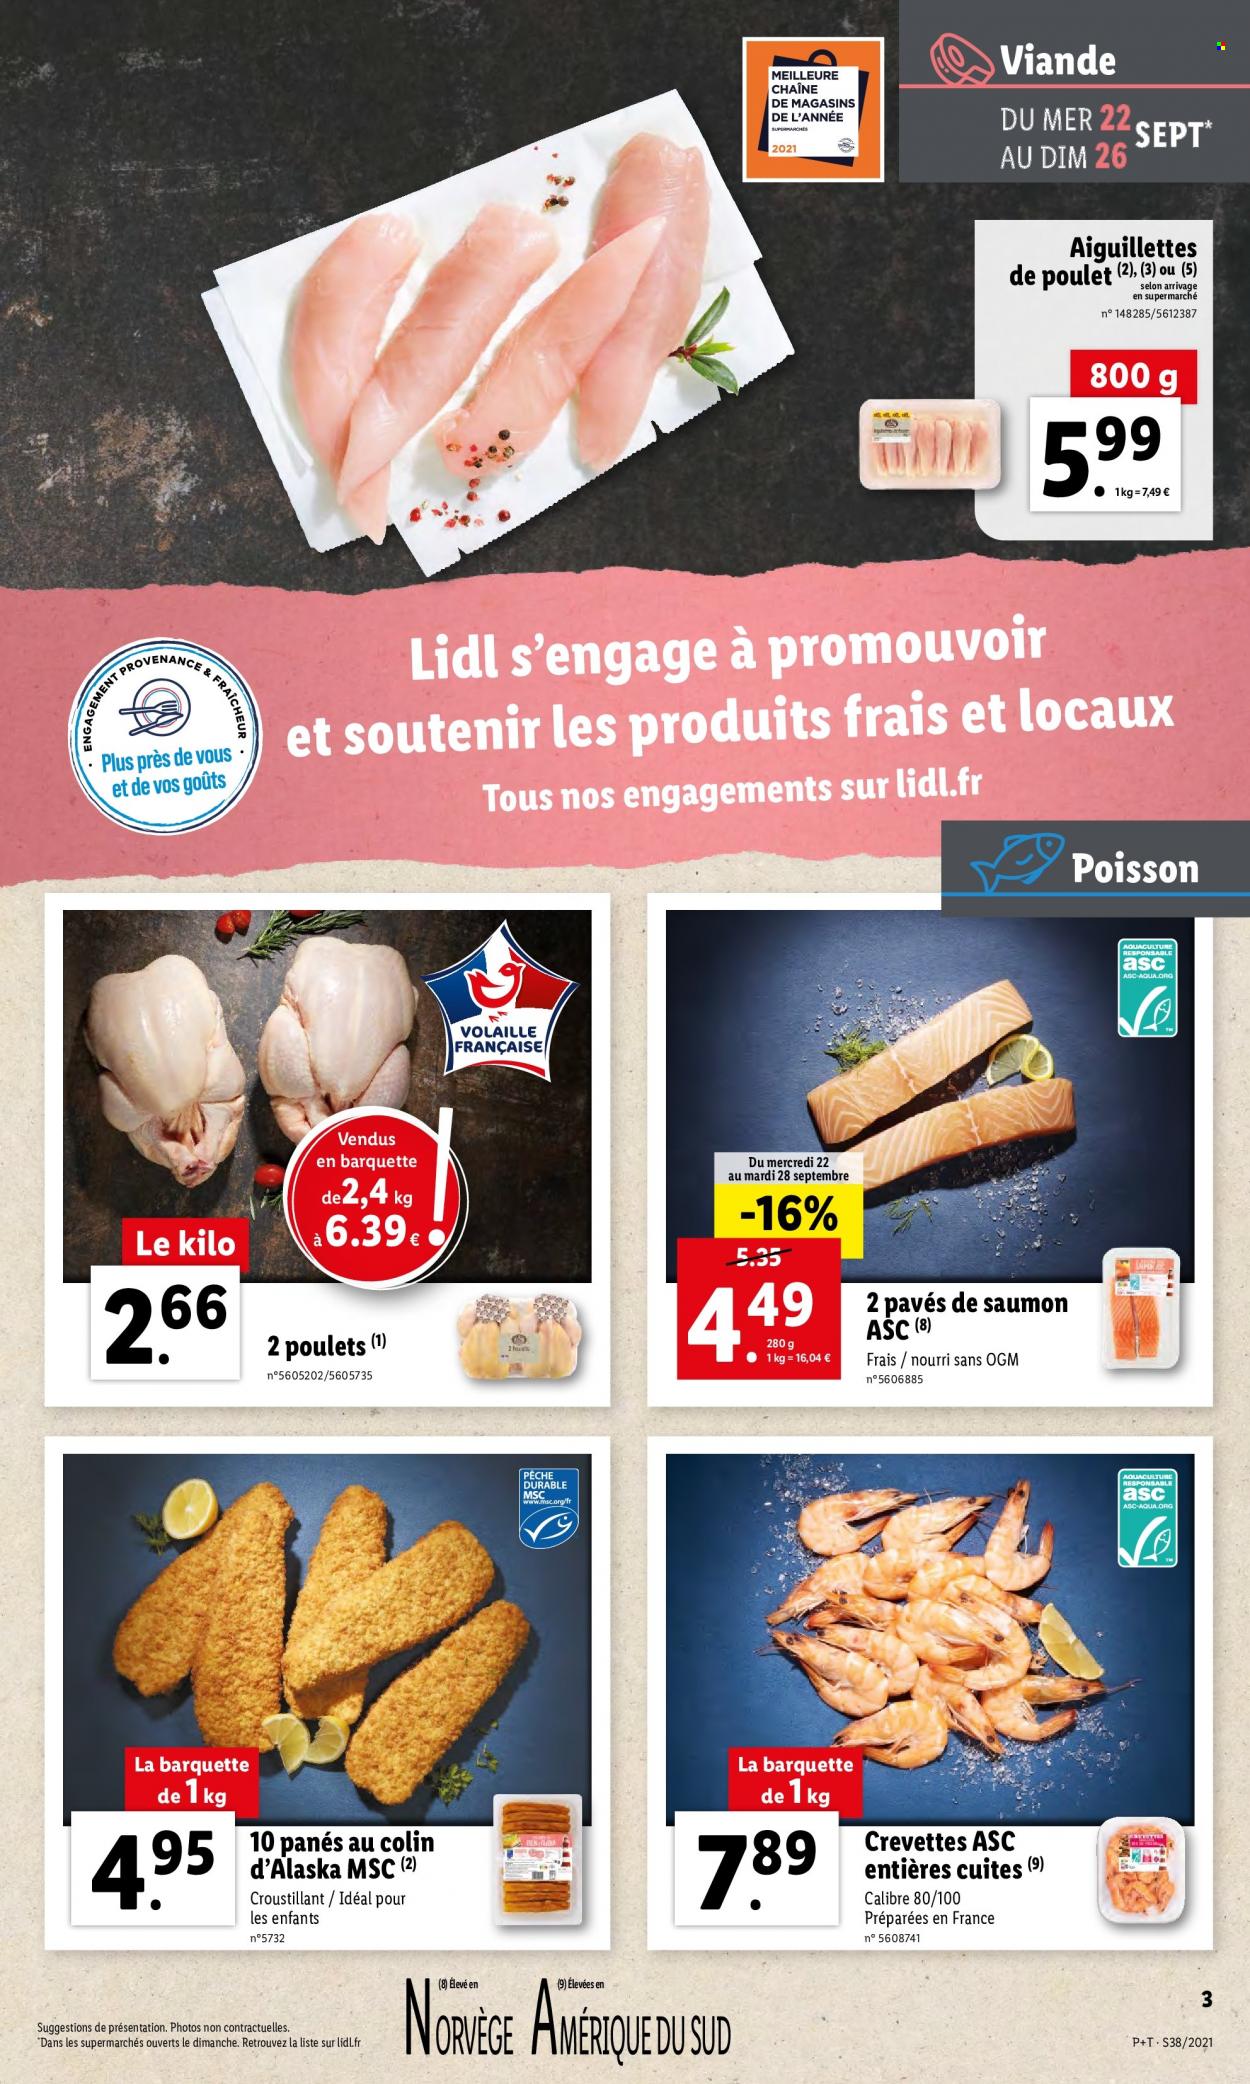 Catalogue Lidl - 22.09.2021 - 28.09.2021. Page 3.